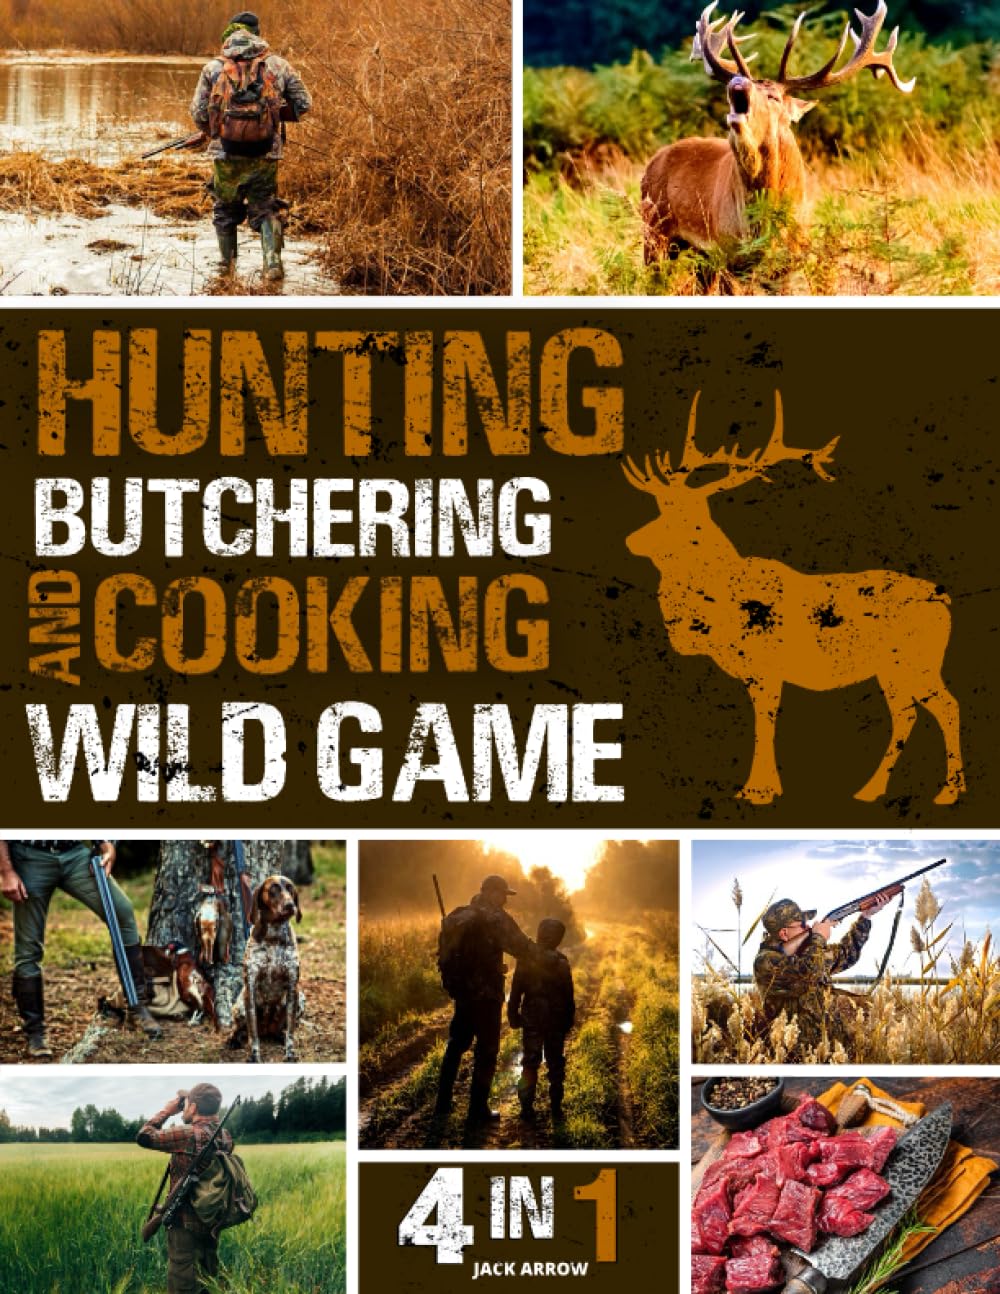 Hunting, Butchering, and Cooking Wild Game Bible: [4 IN 1] The Most Complete Guide for Aspiring and Expert Hunters | Insider Secrets and Strategies for Mastering Big & Small Wild Games